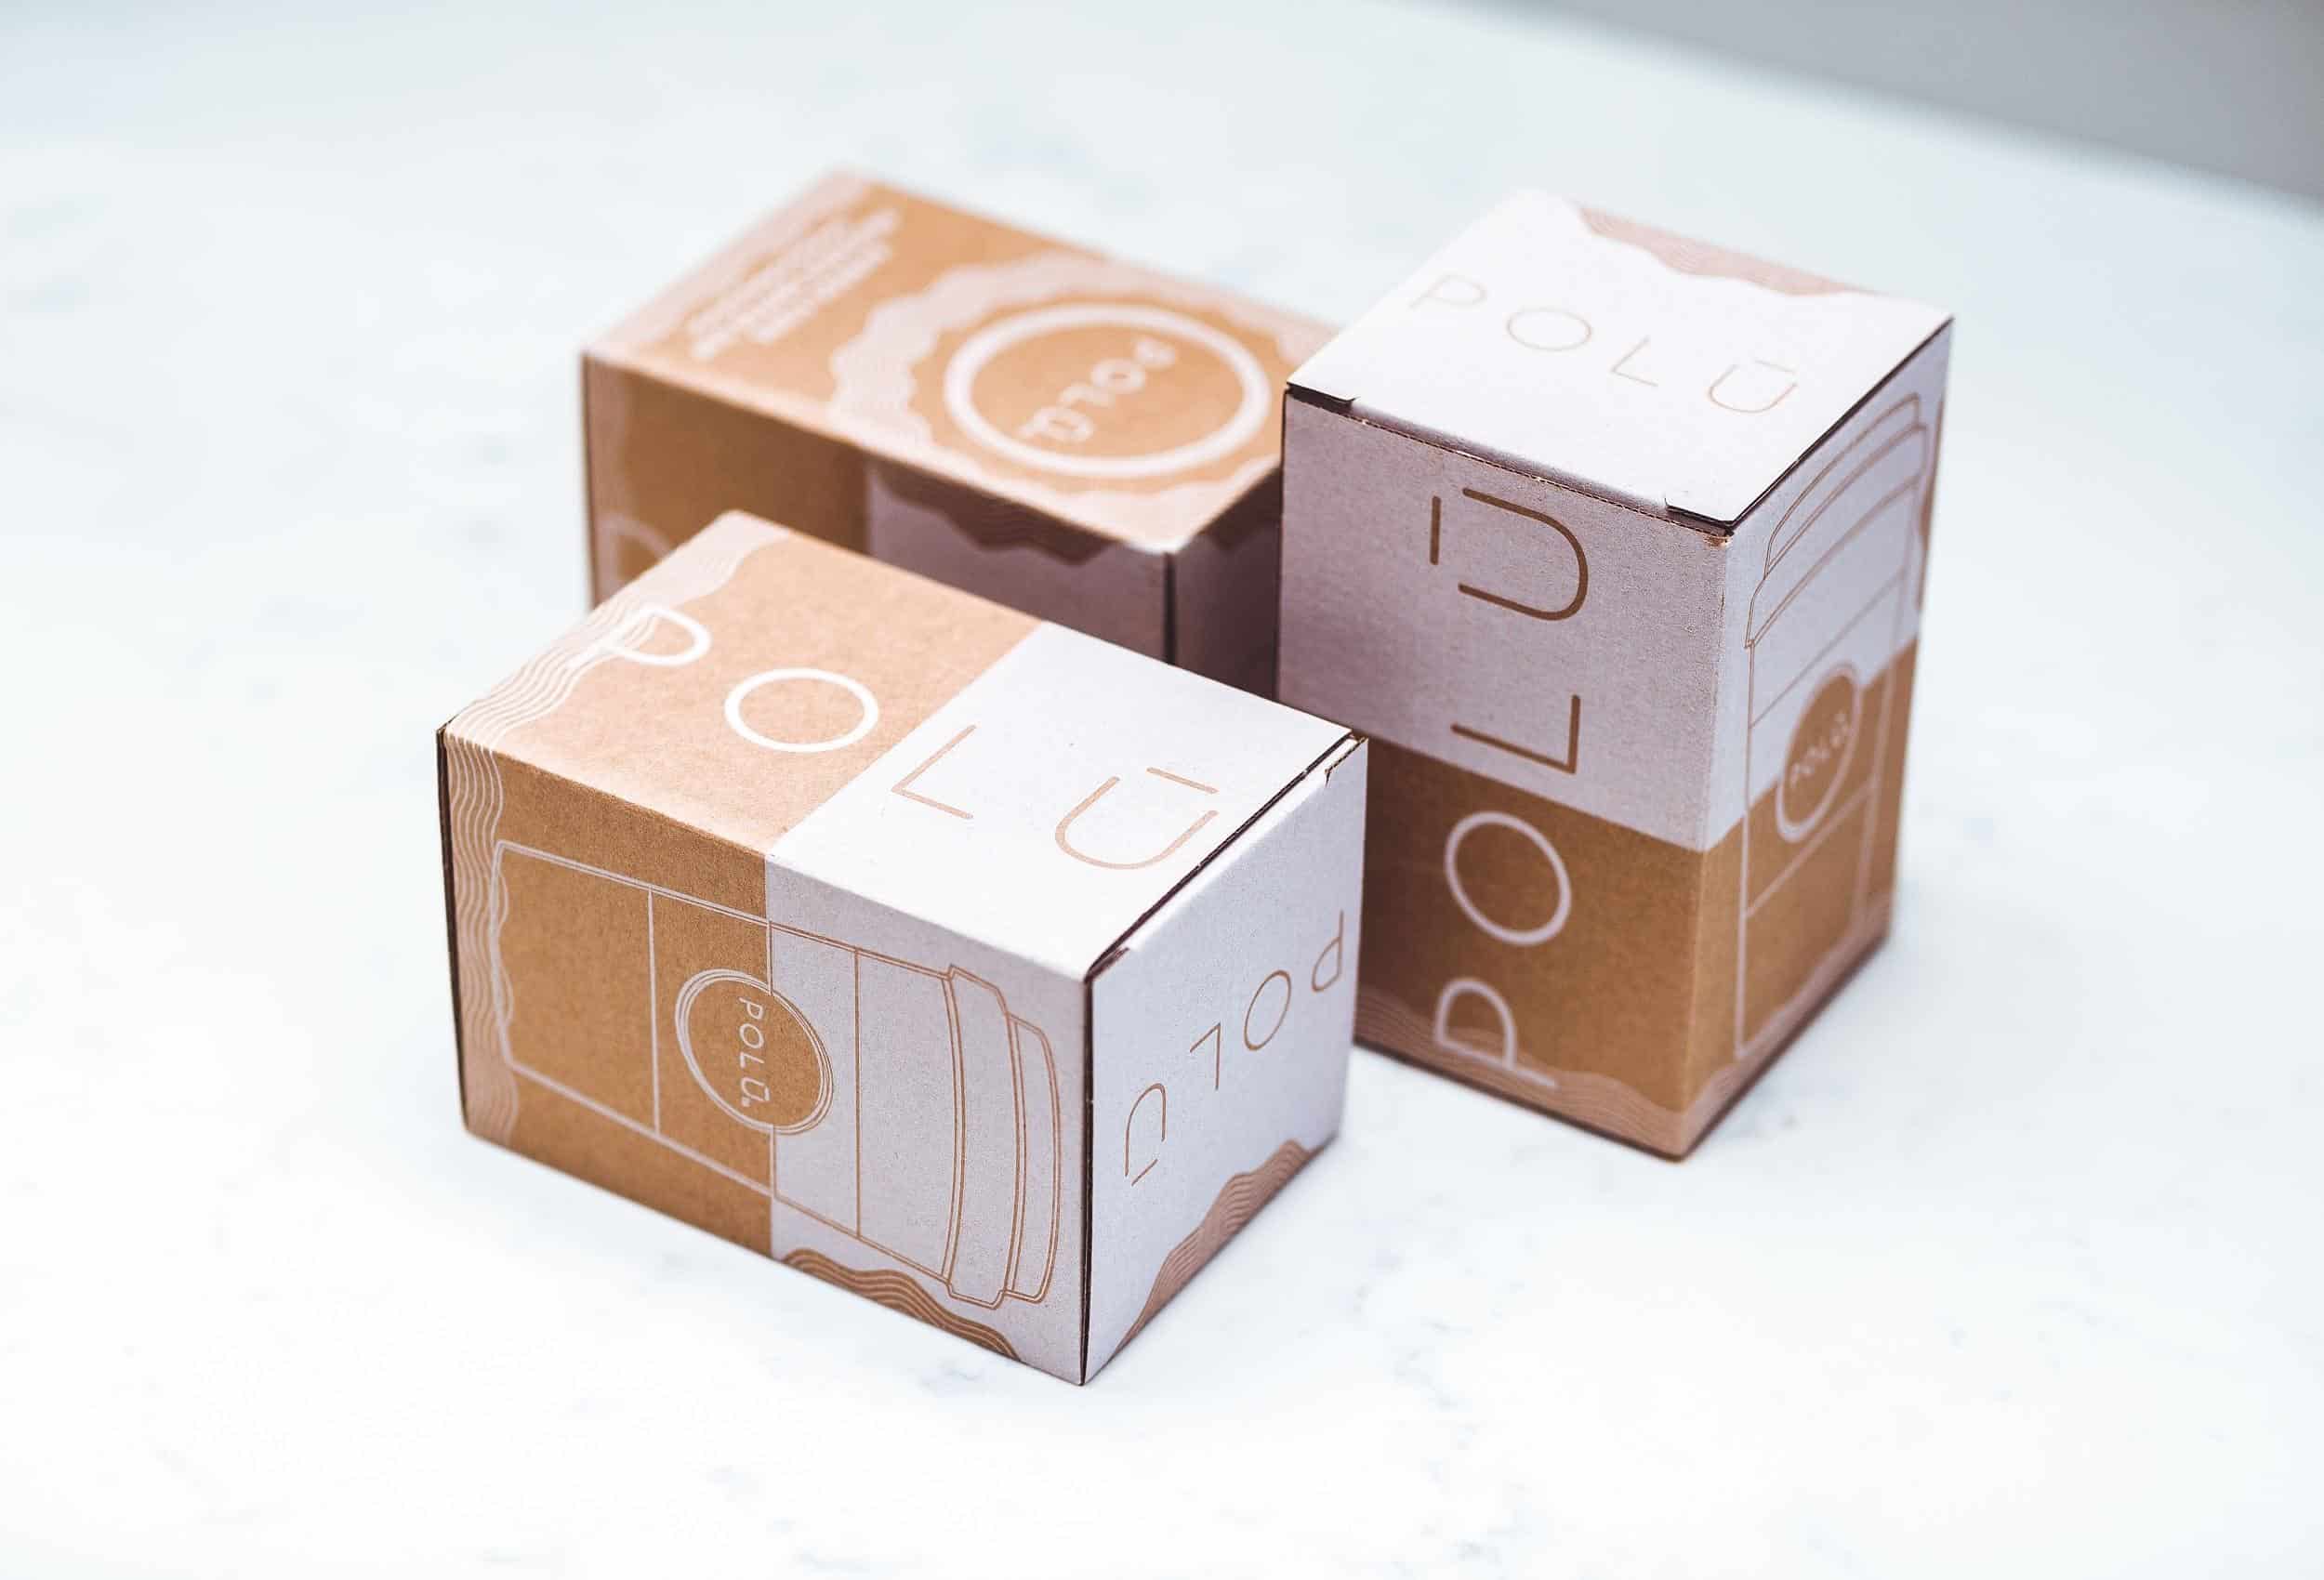 packaging design ideas for small business